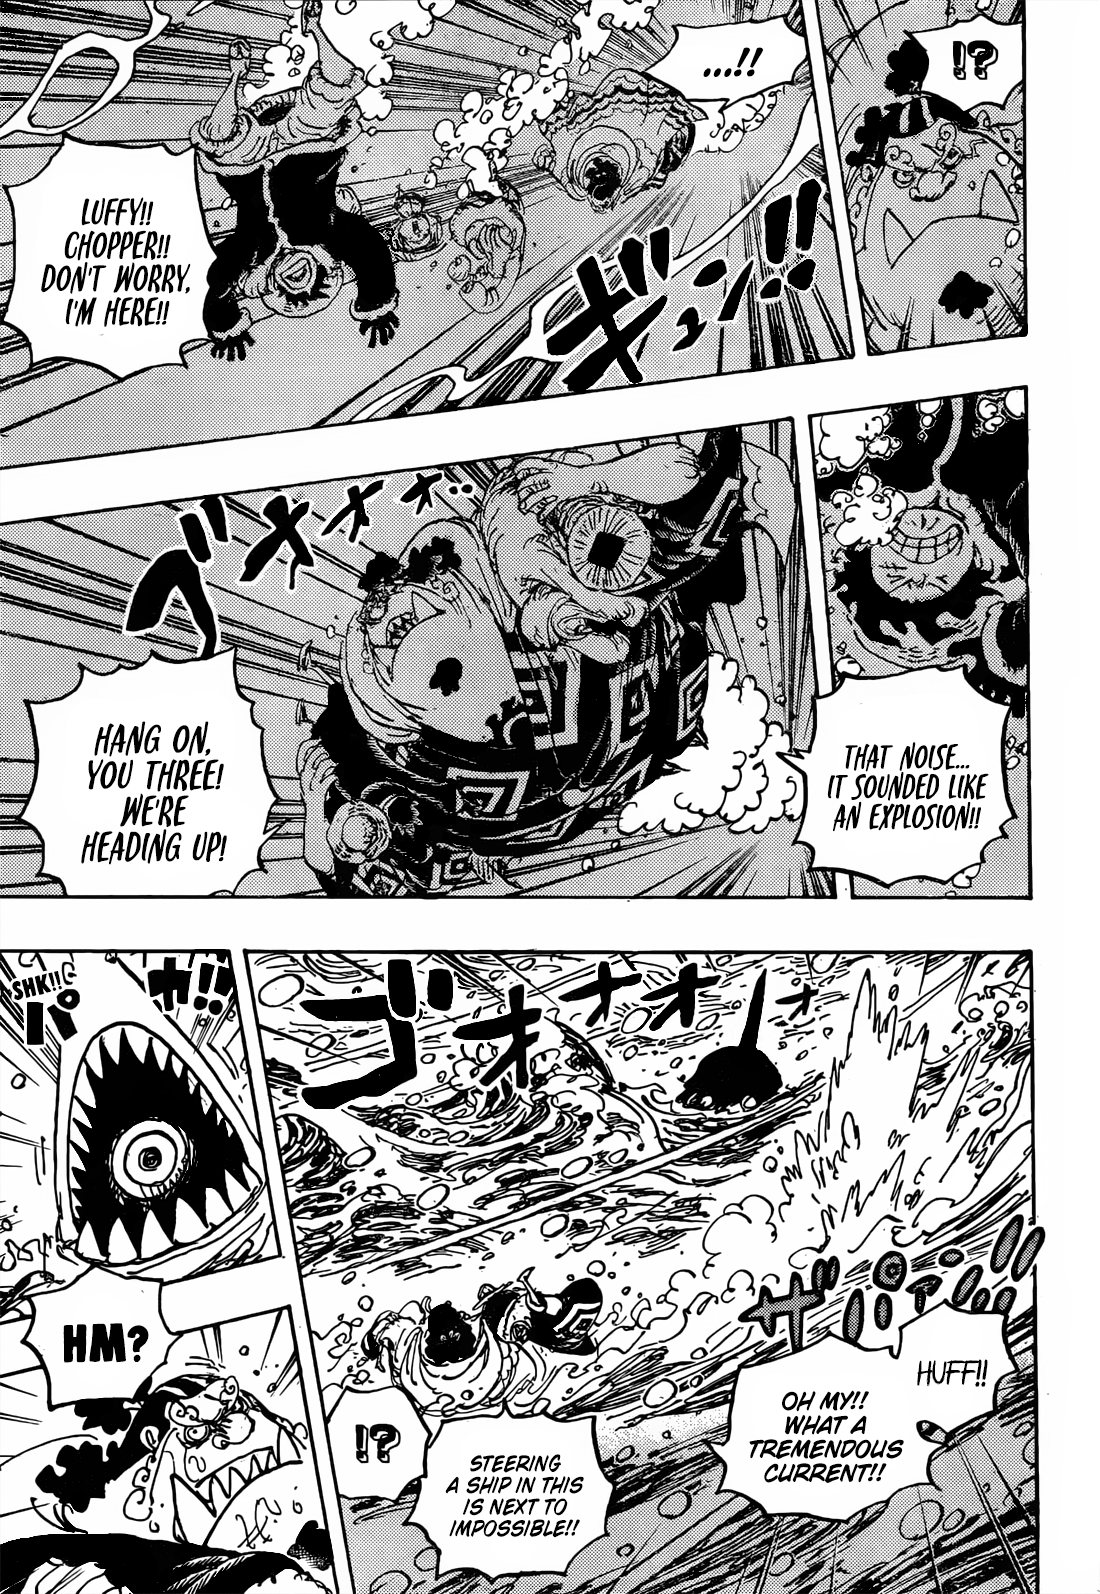 One Piece — One Piece - Capitulo 1061